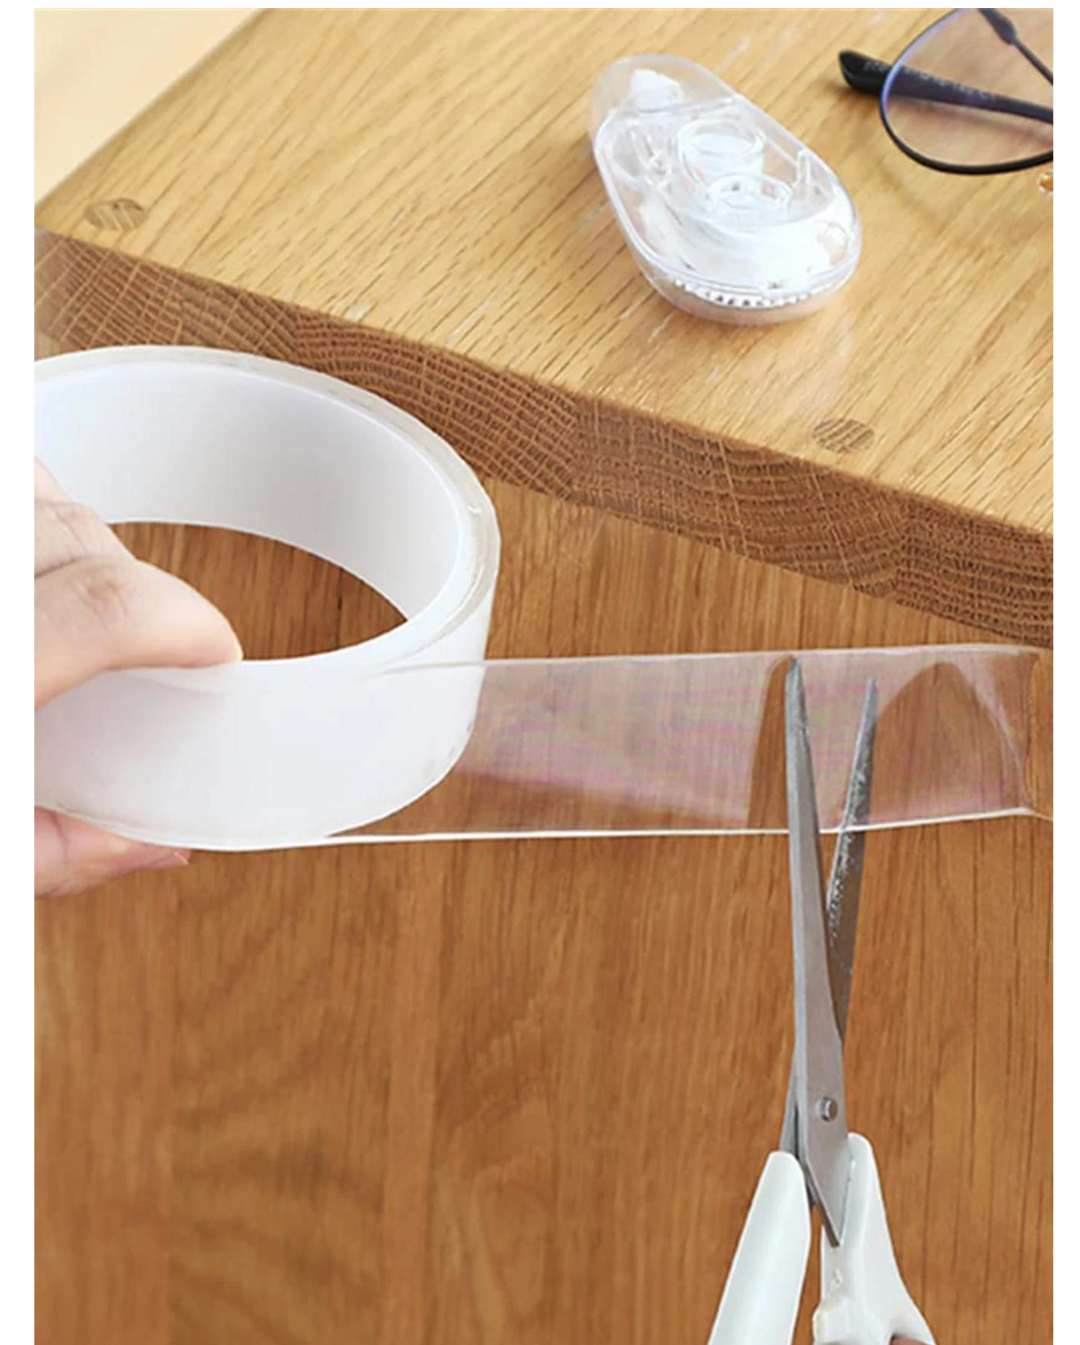 NanoGrip: Clear Double-sided Adhesive Tape - Simple, Reusable, and Versatile for Any Space!